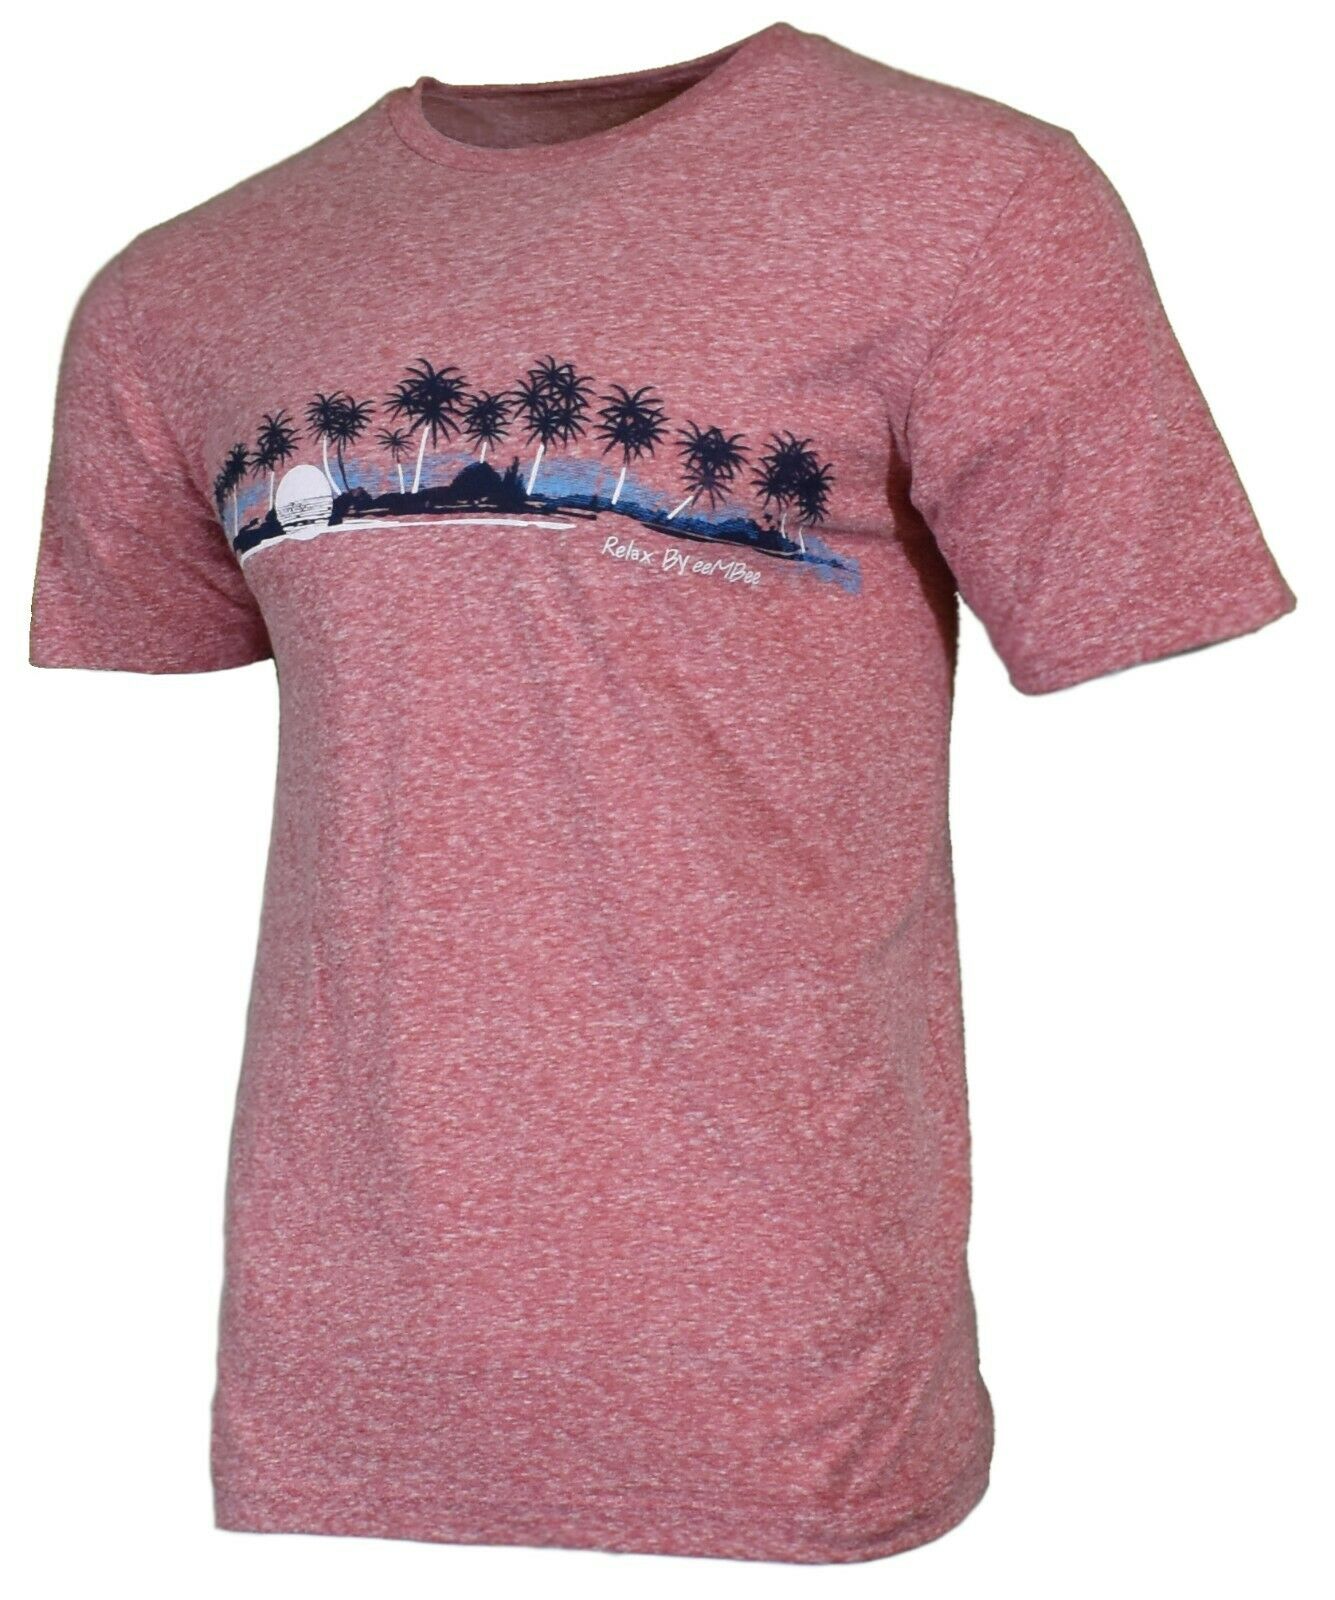 Men's T-Shirt Sunset Beach Palm Trees Relax by eMBee